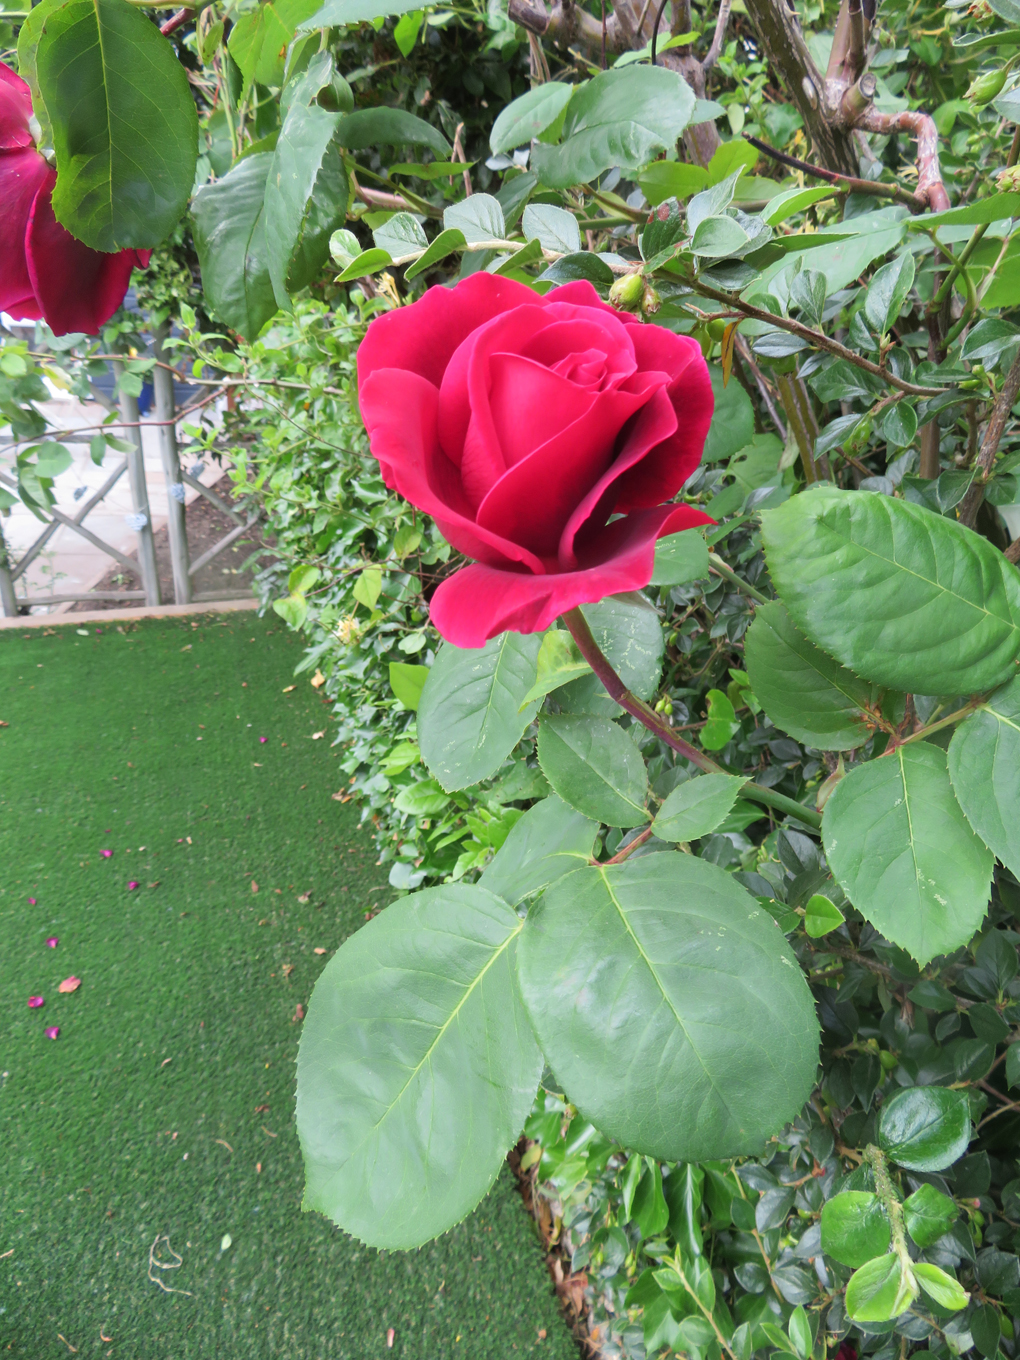 We see a picture of the most perfectly formed red rose framed by a deep green hedge